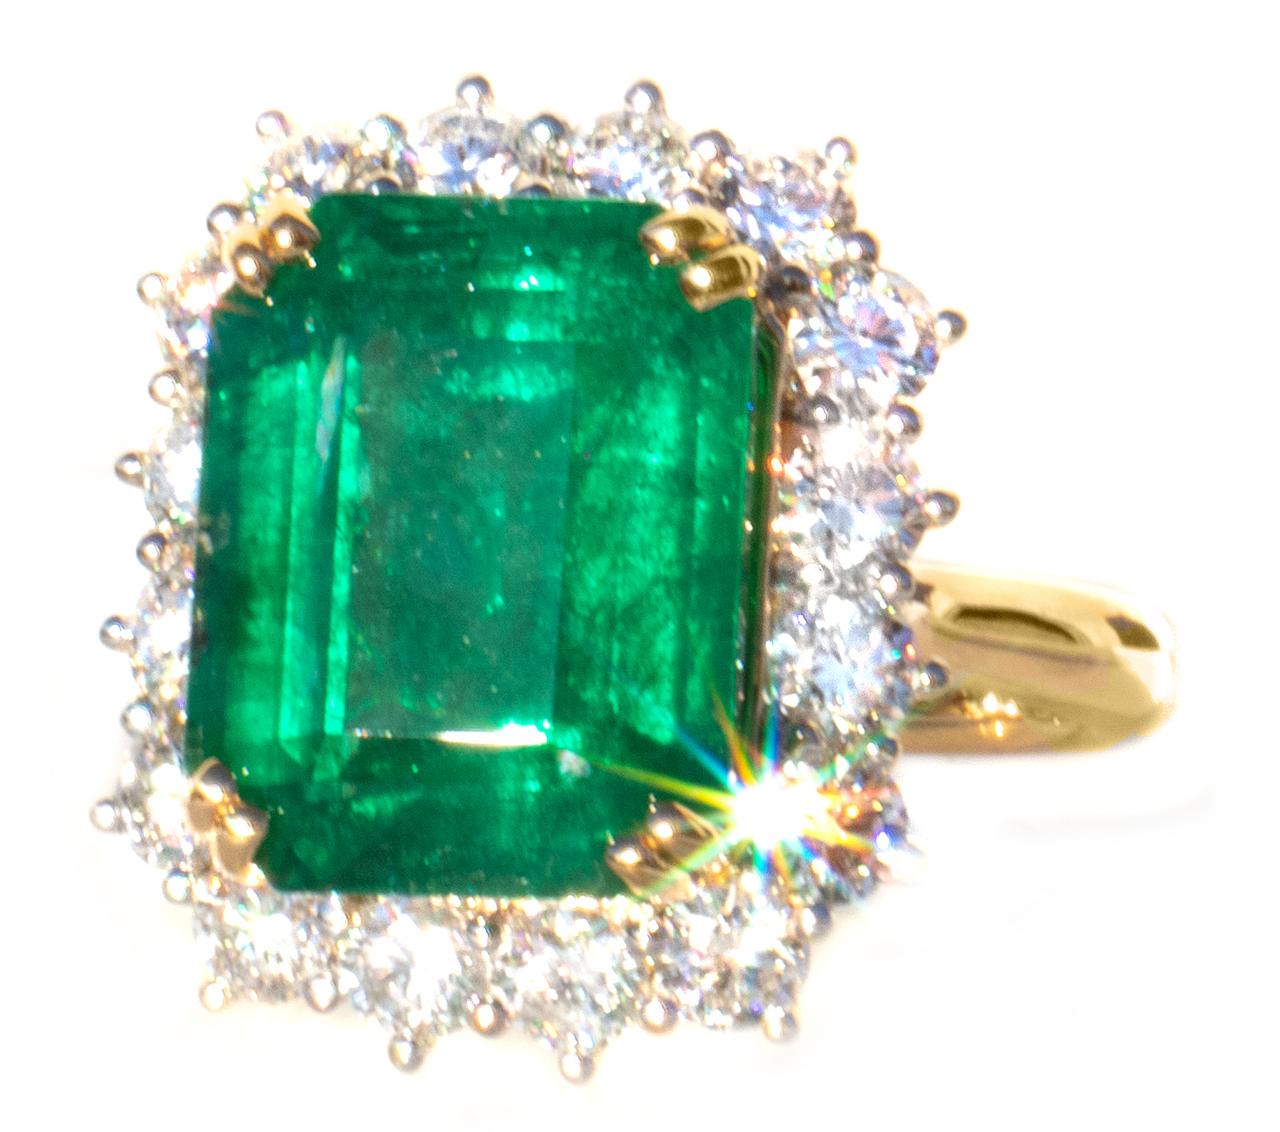 This emerald ring is just gorgeous... large enough to turn heads, a perfect emerald green fully saturated color, great emerald step cut - surrounded by large VVS-VS colorless diamonds (the higher quality, clean and clear diamonds make such a